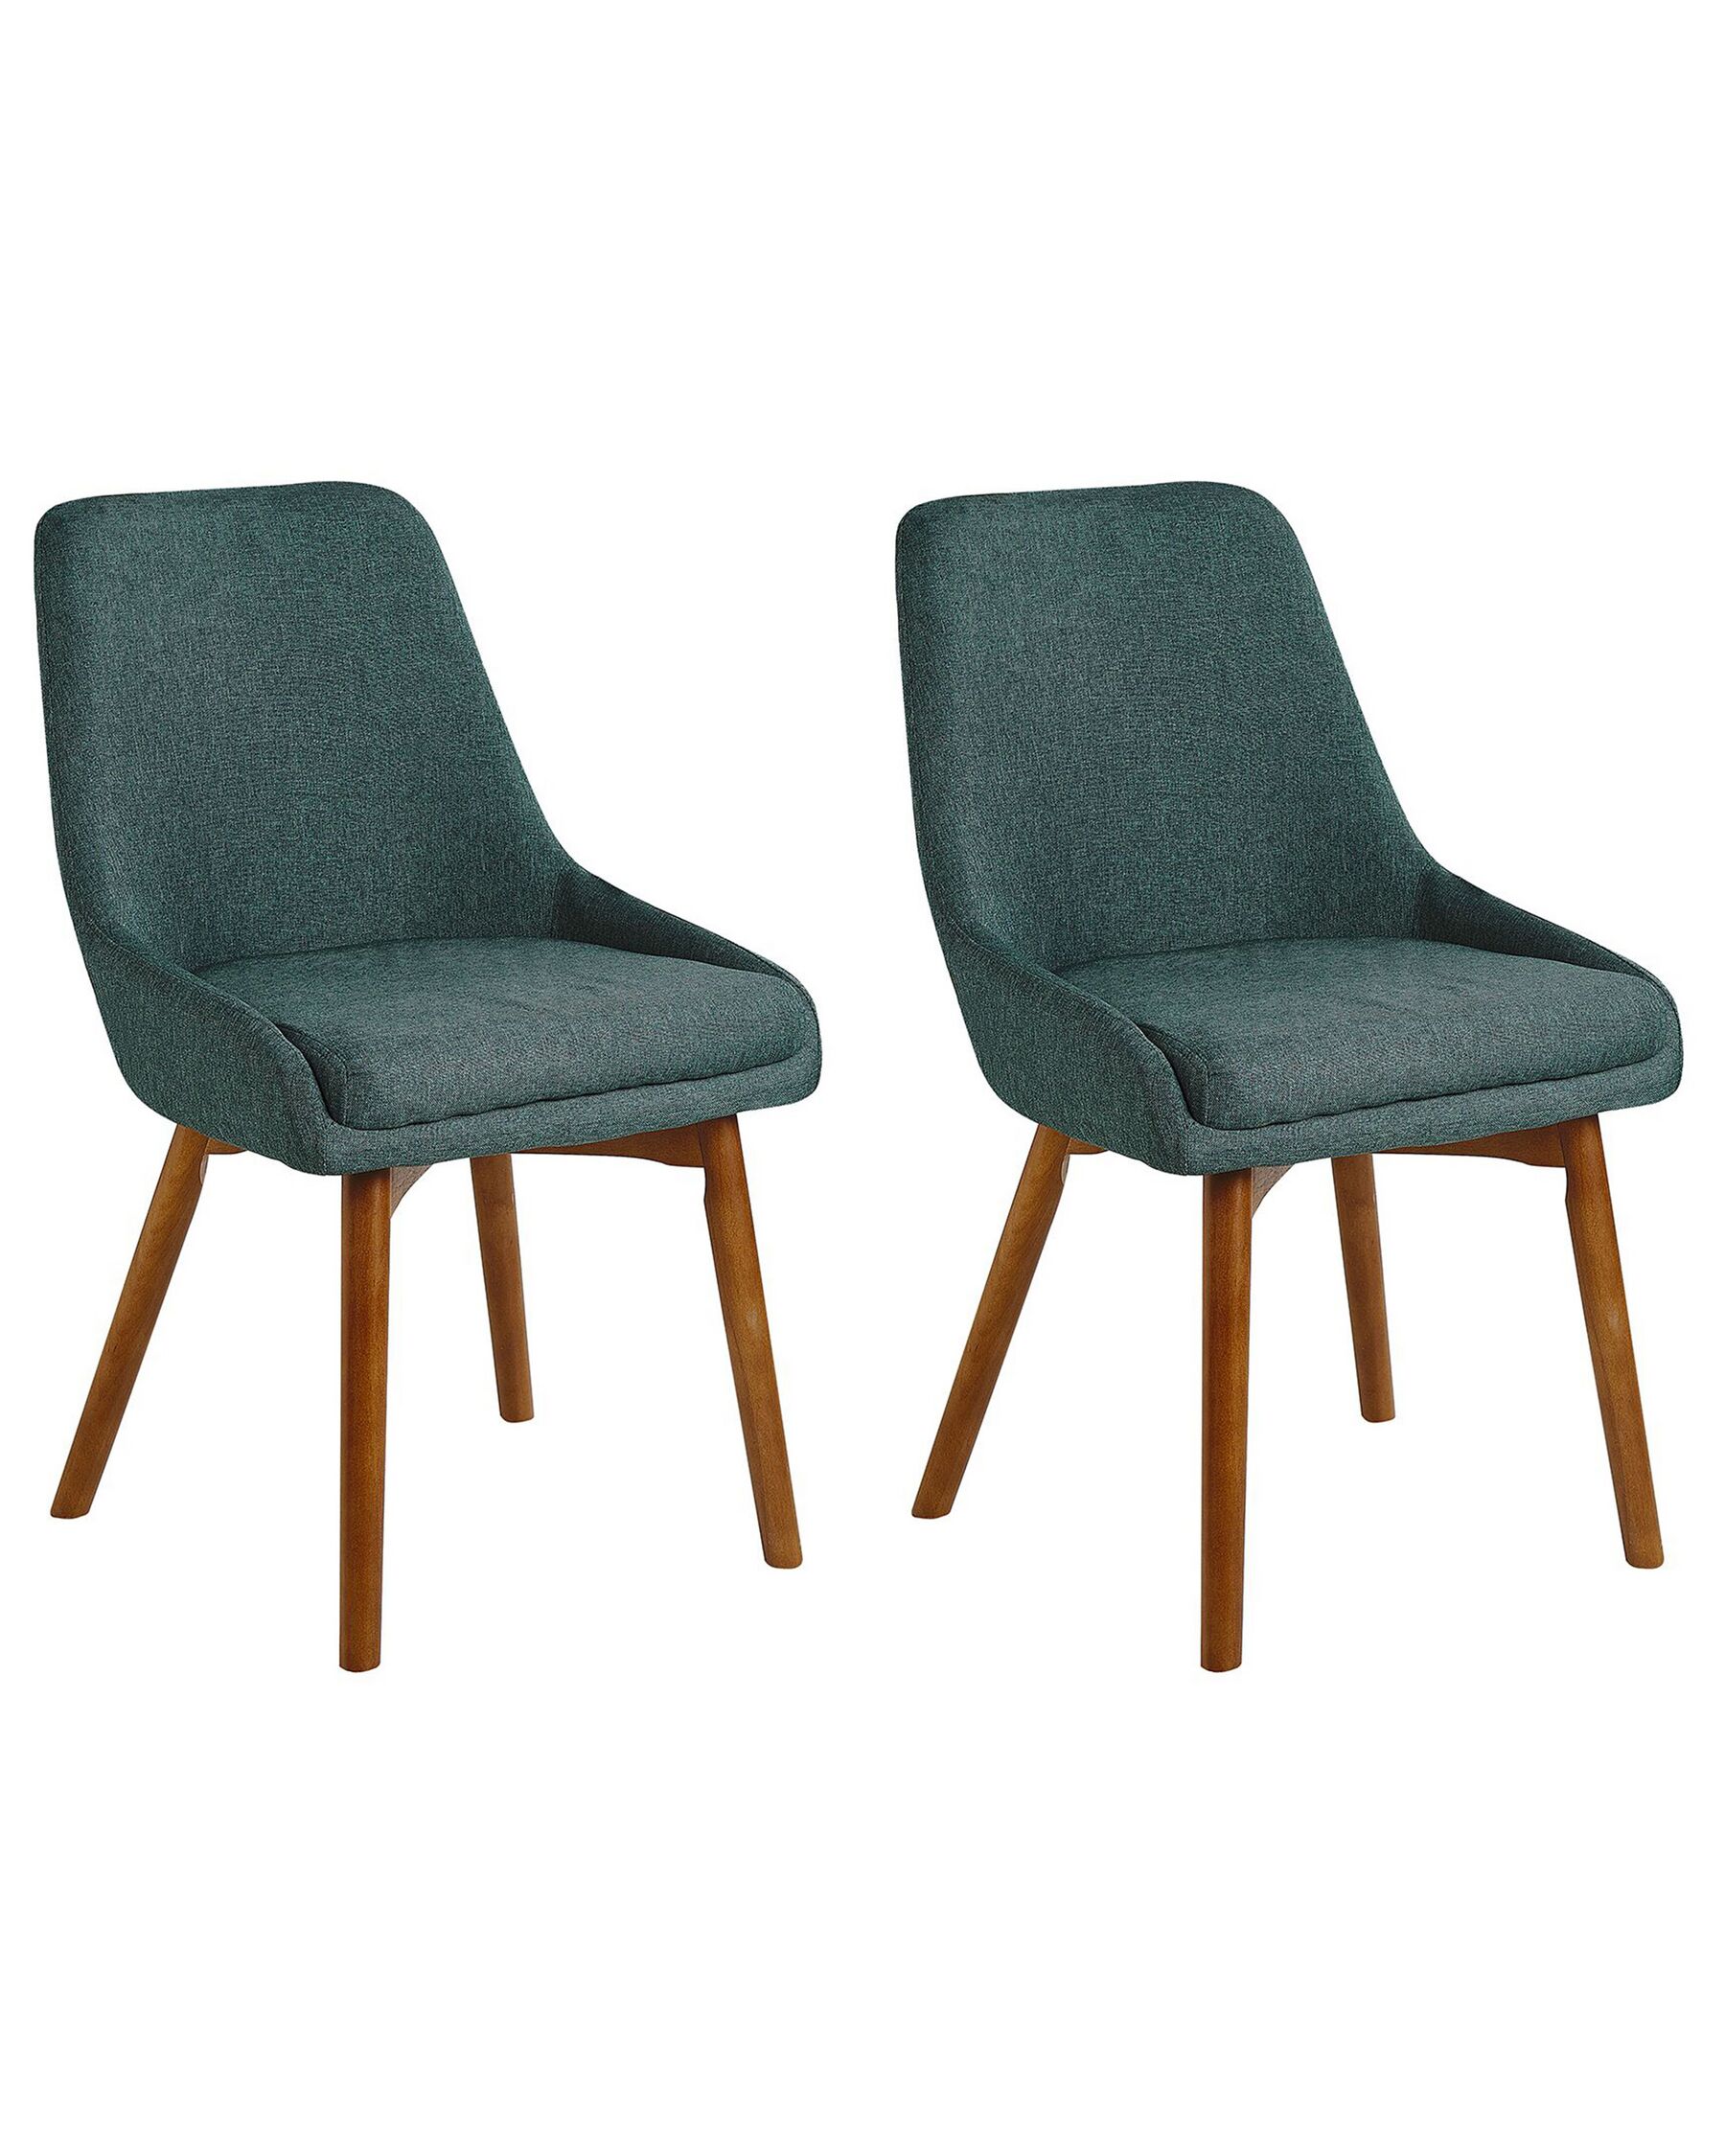 Set of 2 Fabric Dining Chairs Green MELFORT_799989